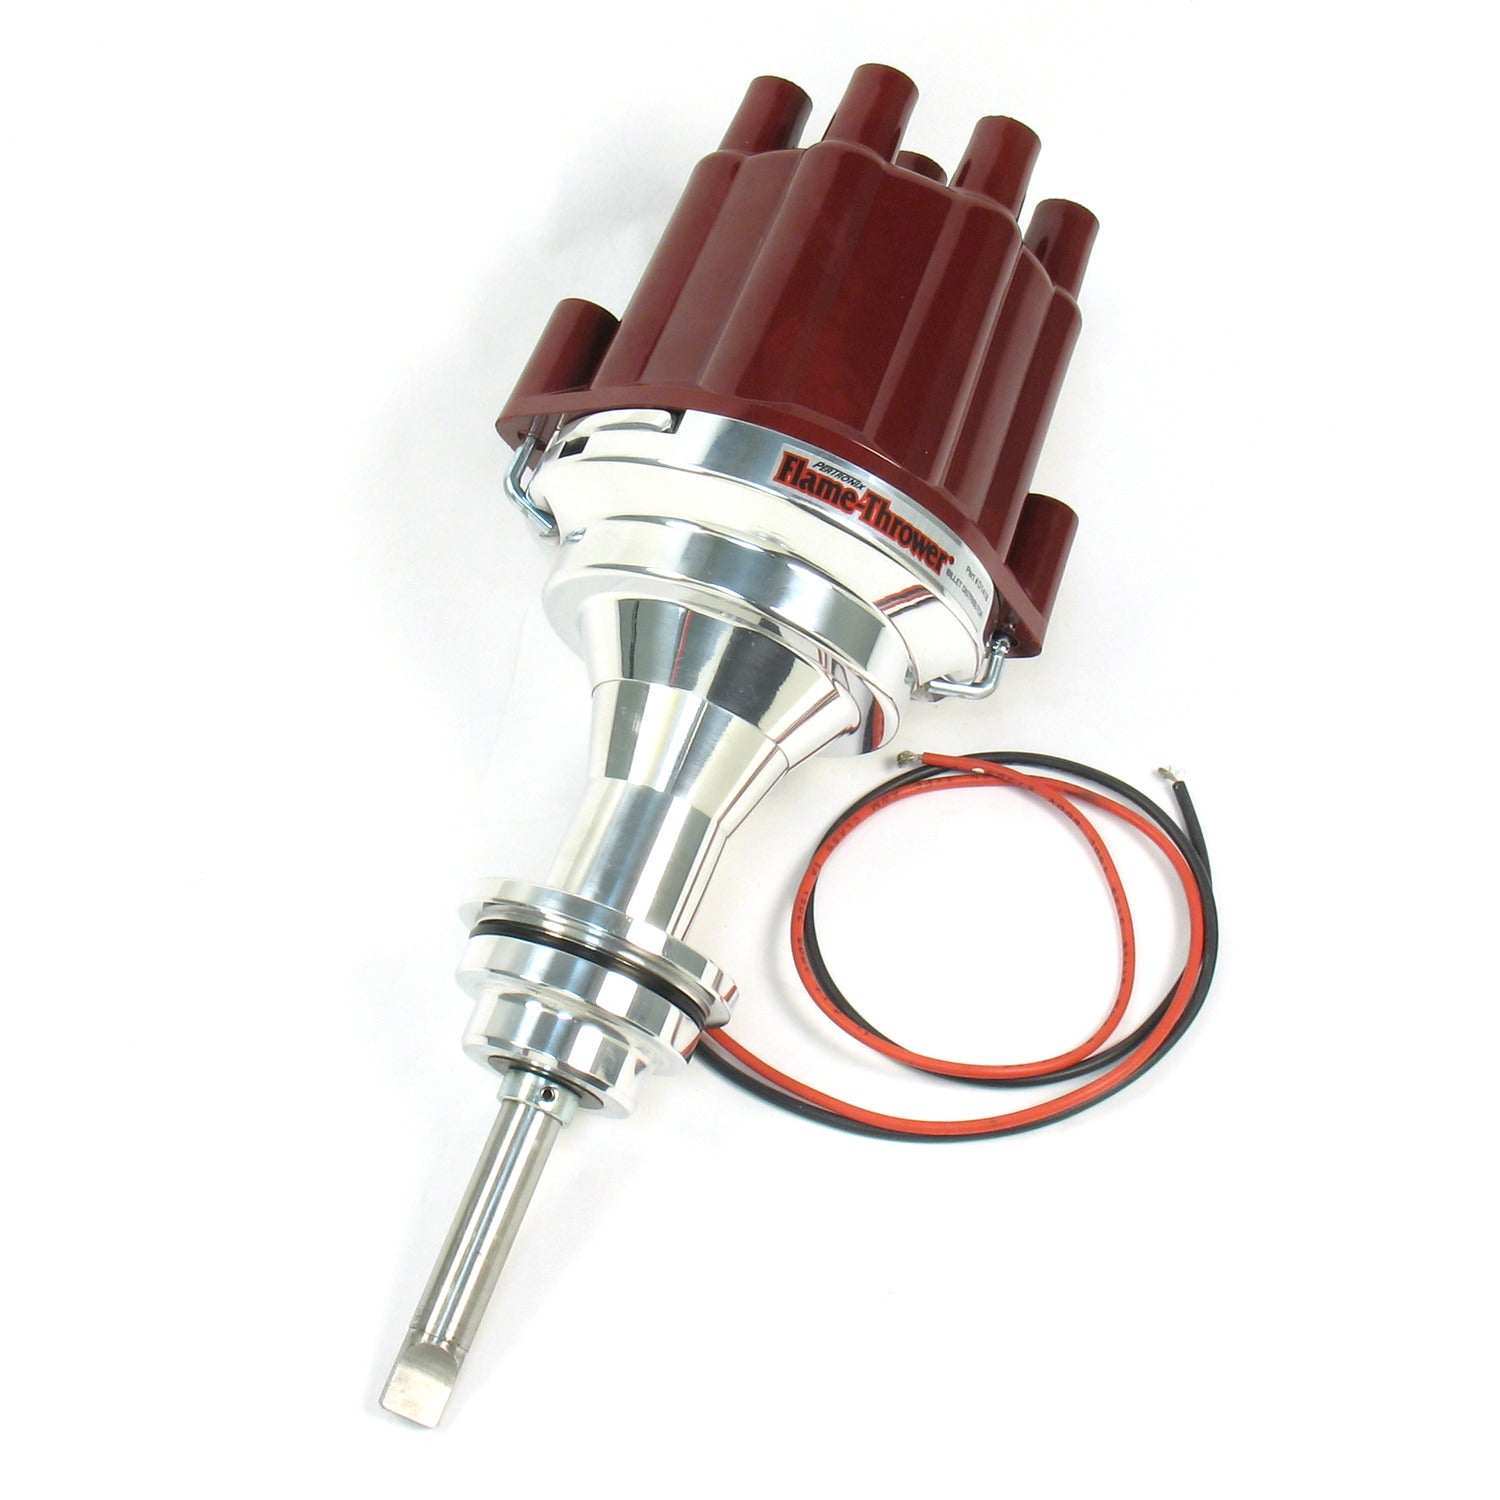 PerTronix D141801 Flame-Thrower Electronic Distributor Billet Chrysler/Dodge/Plymouth 273-360 Plug and Play with Ignitor II Technology Non Vacuum Advance Red Cap